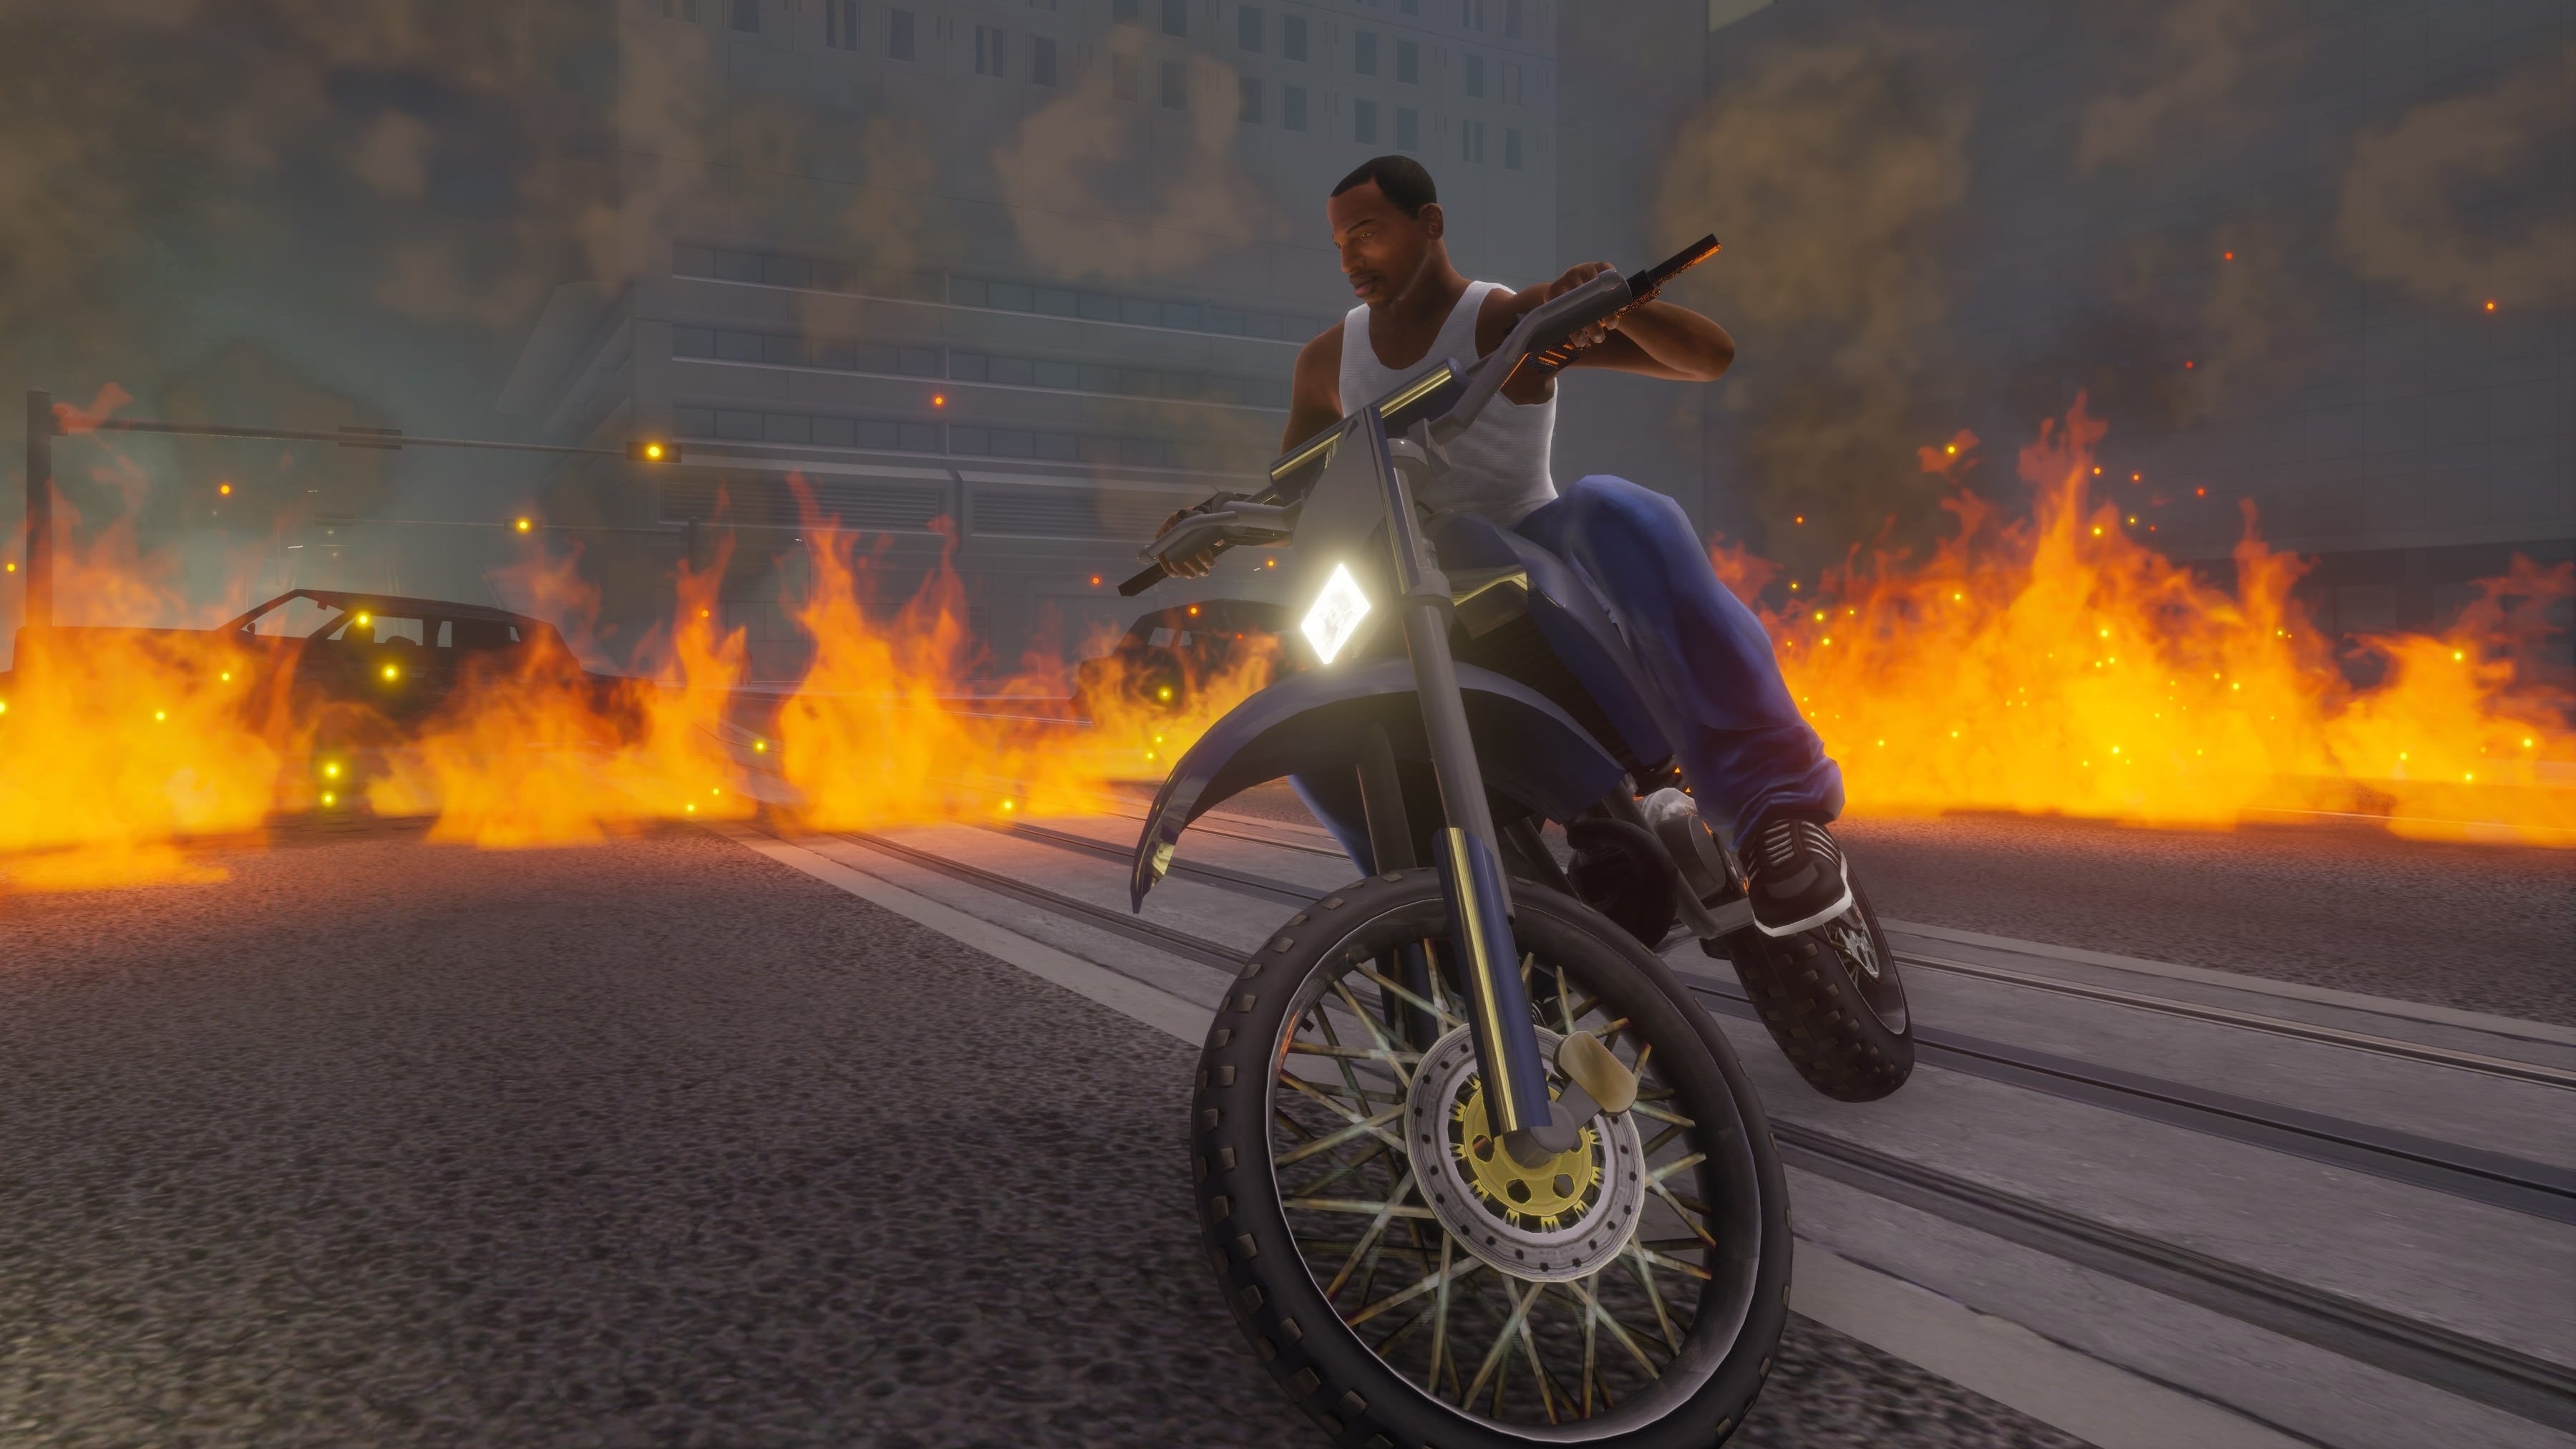 Carl Johnson from GTA San Andreas riding a motorcycle while surrounded by fire